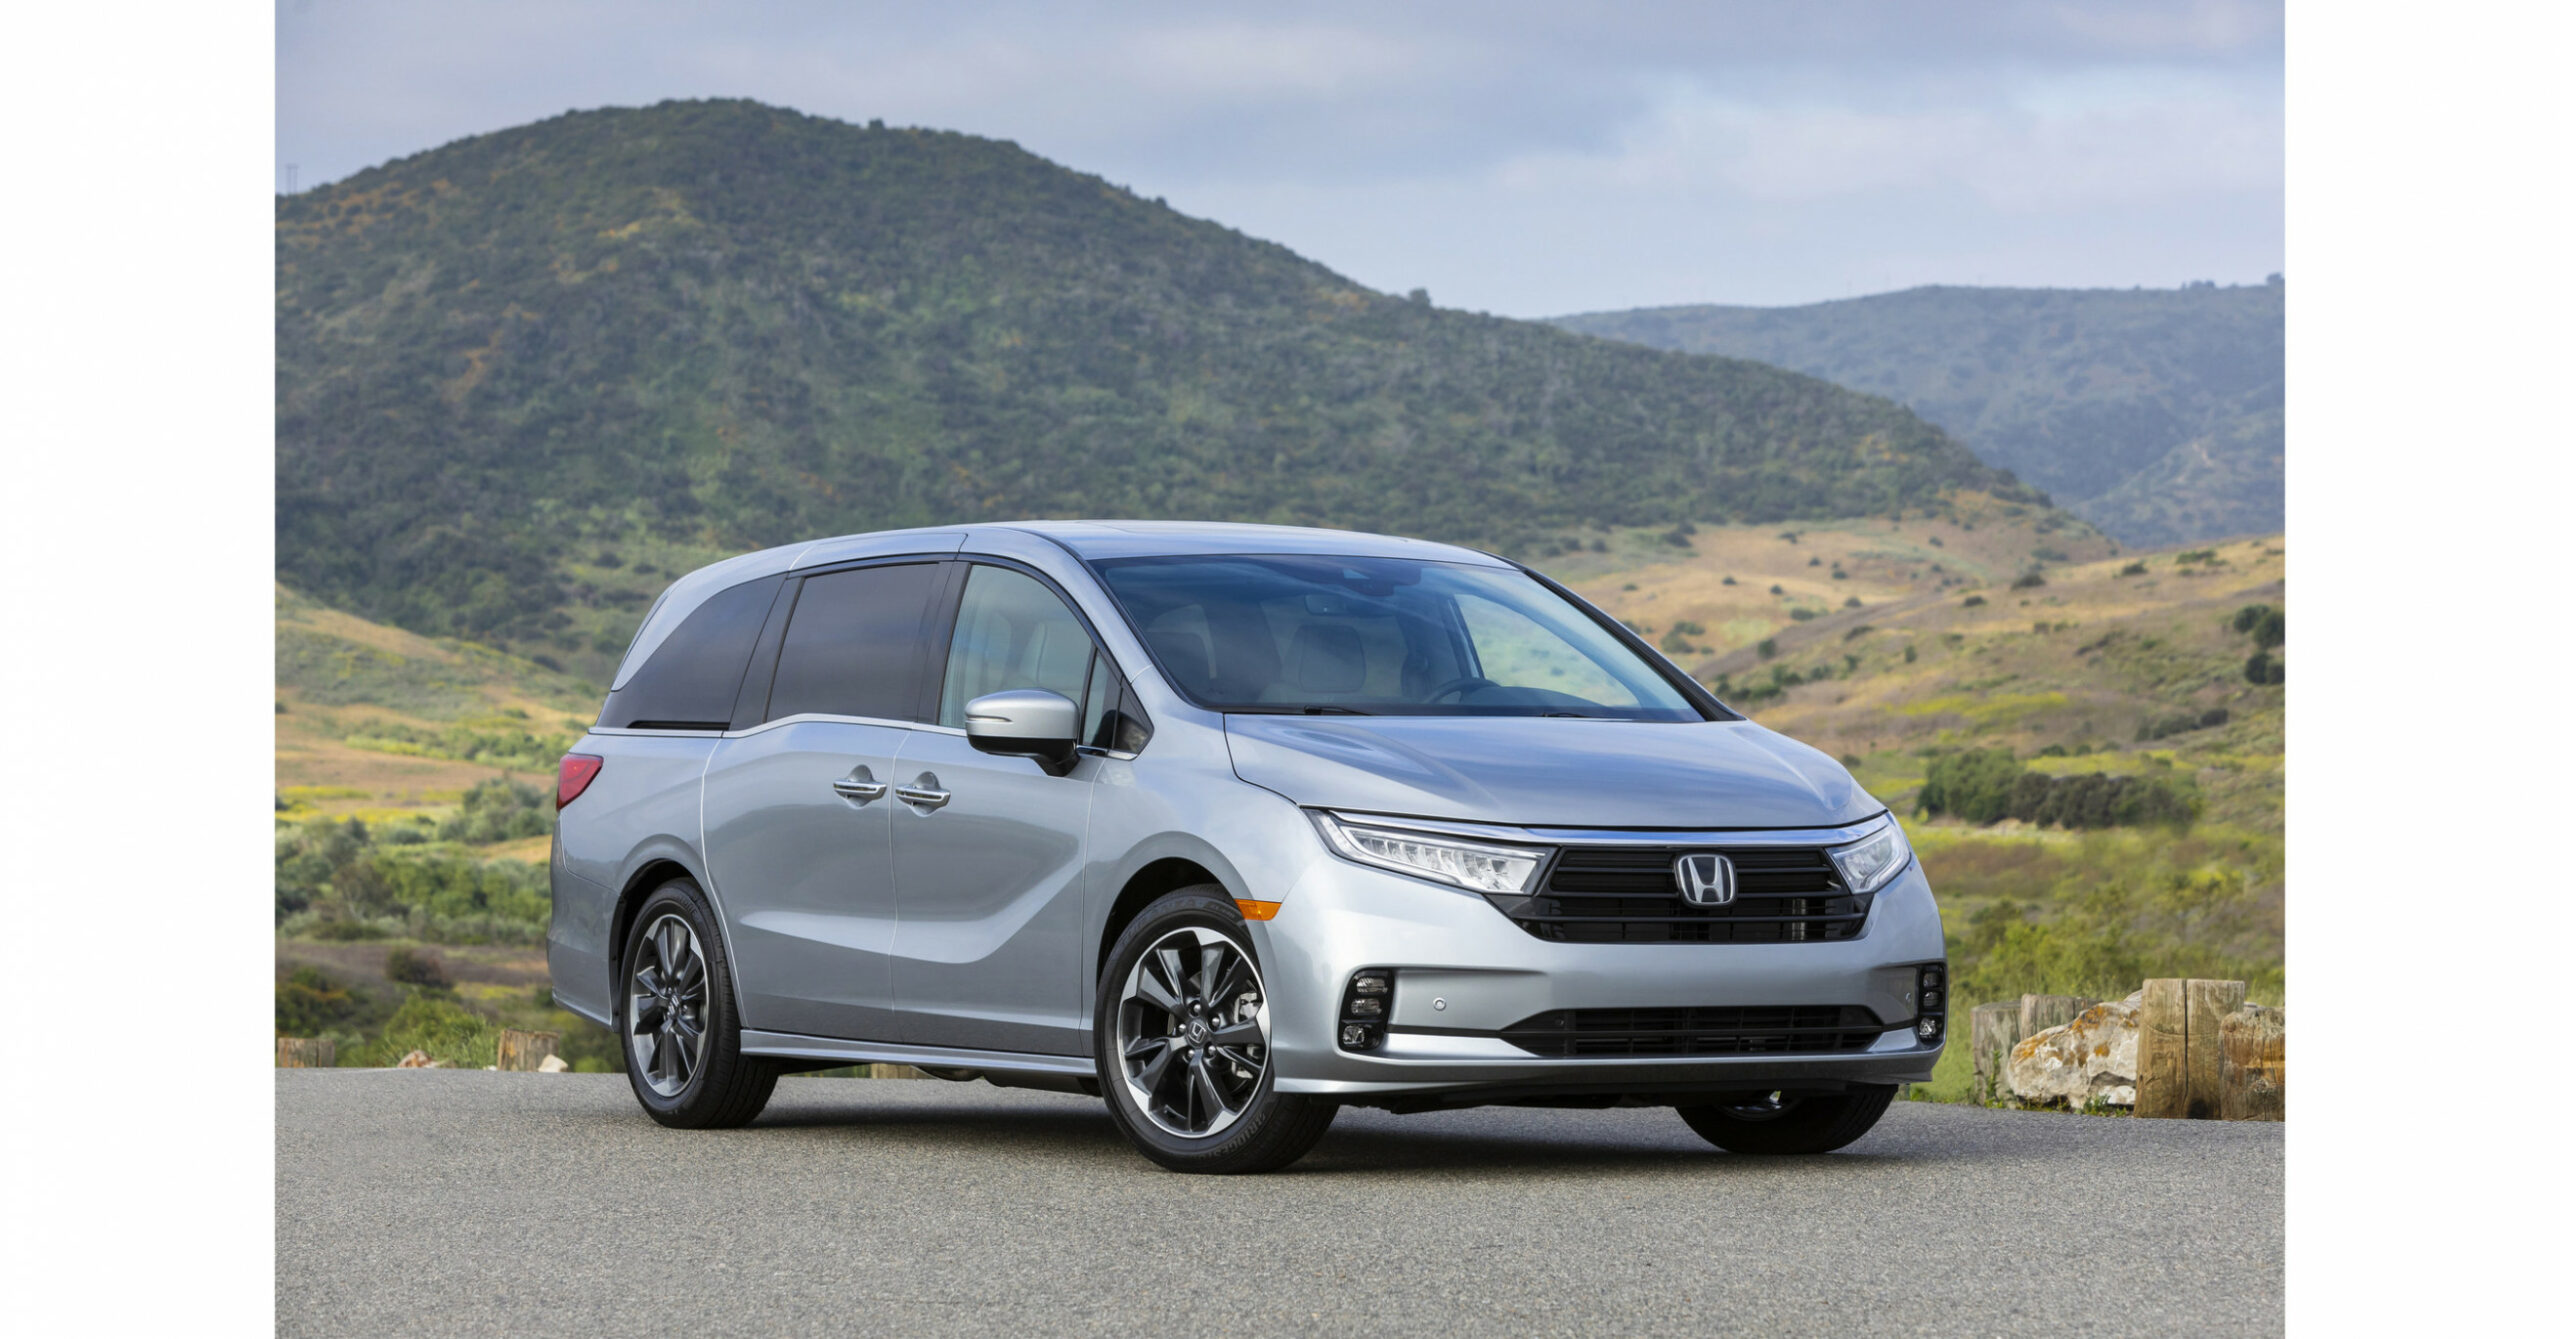 Release When Does 2022 Honda Odyssey Come Out